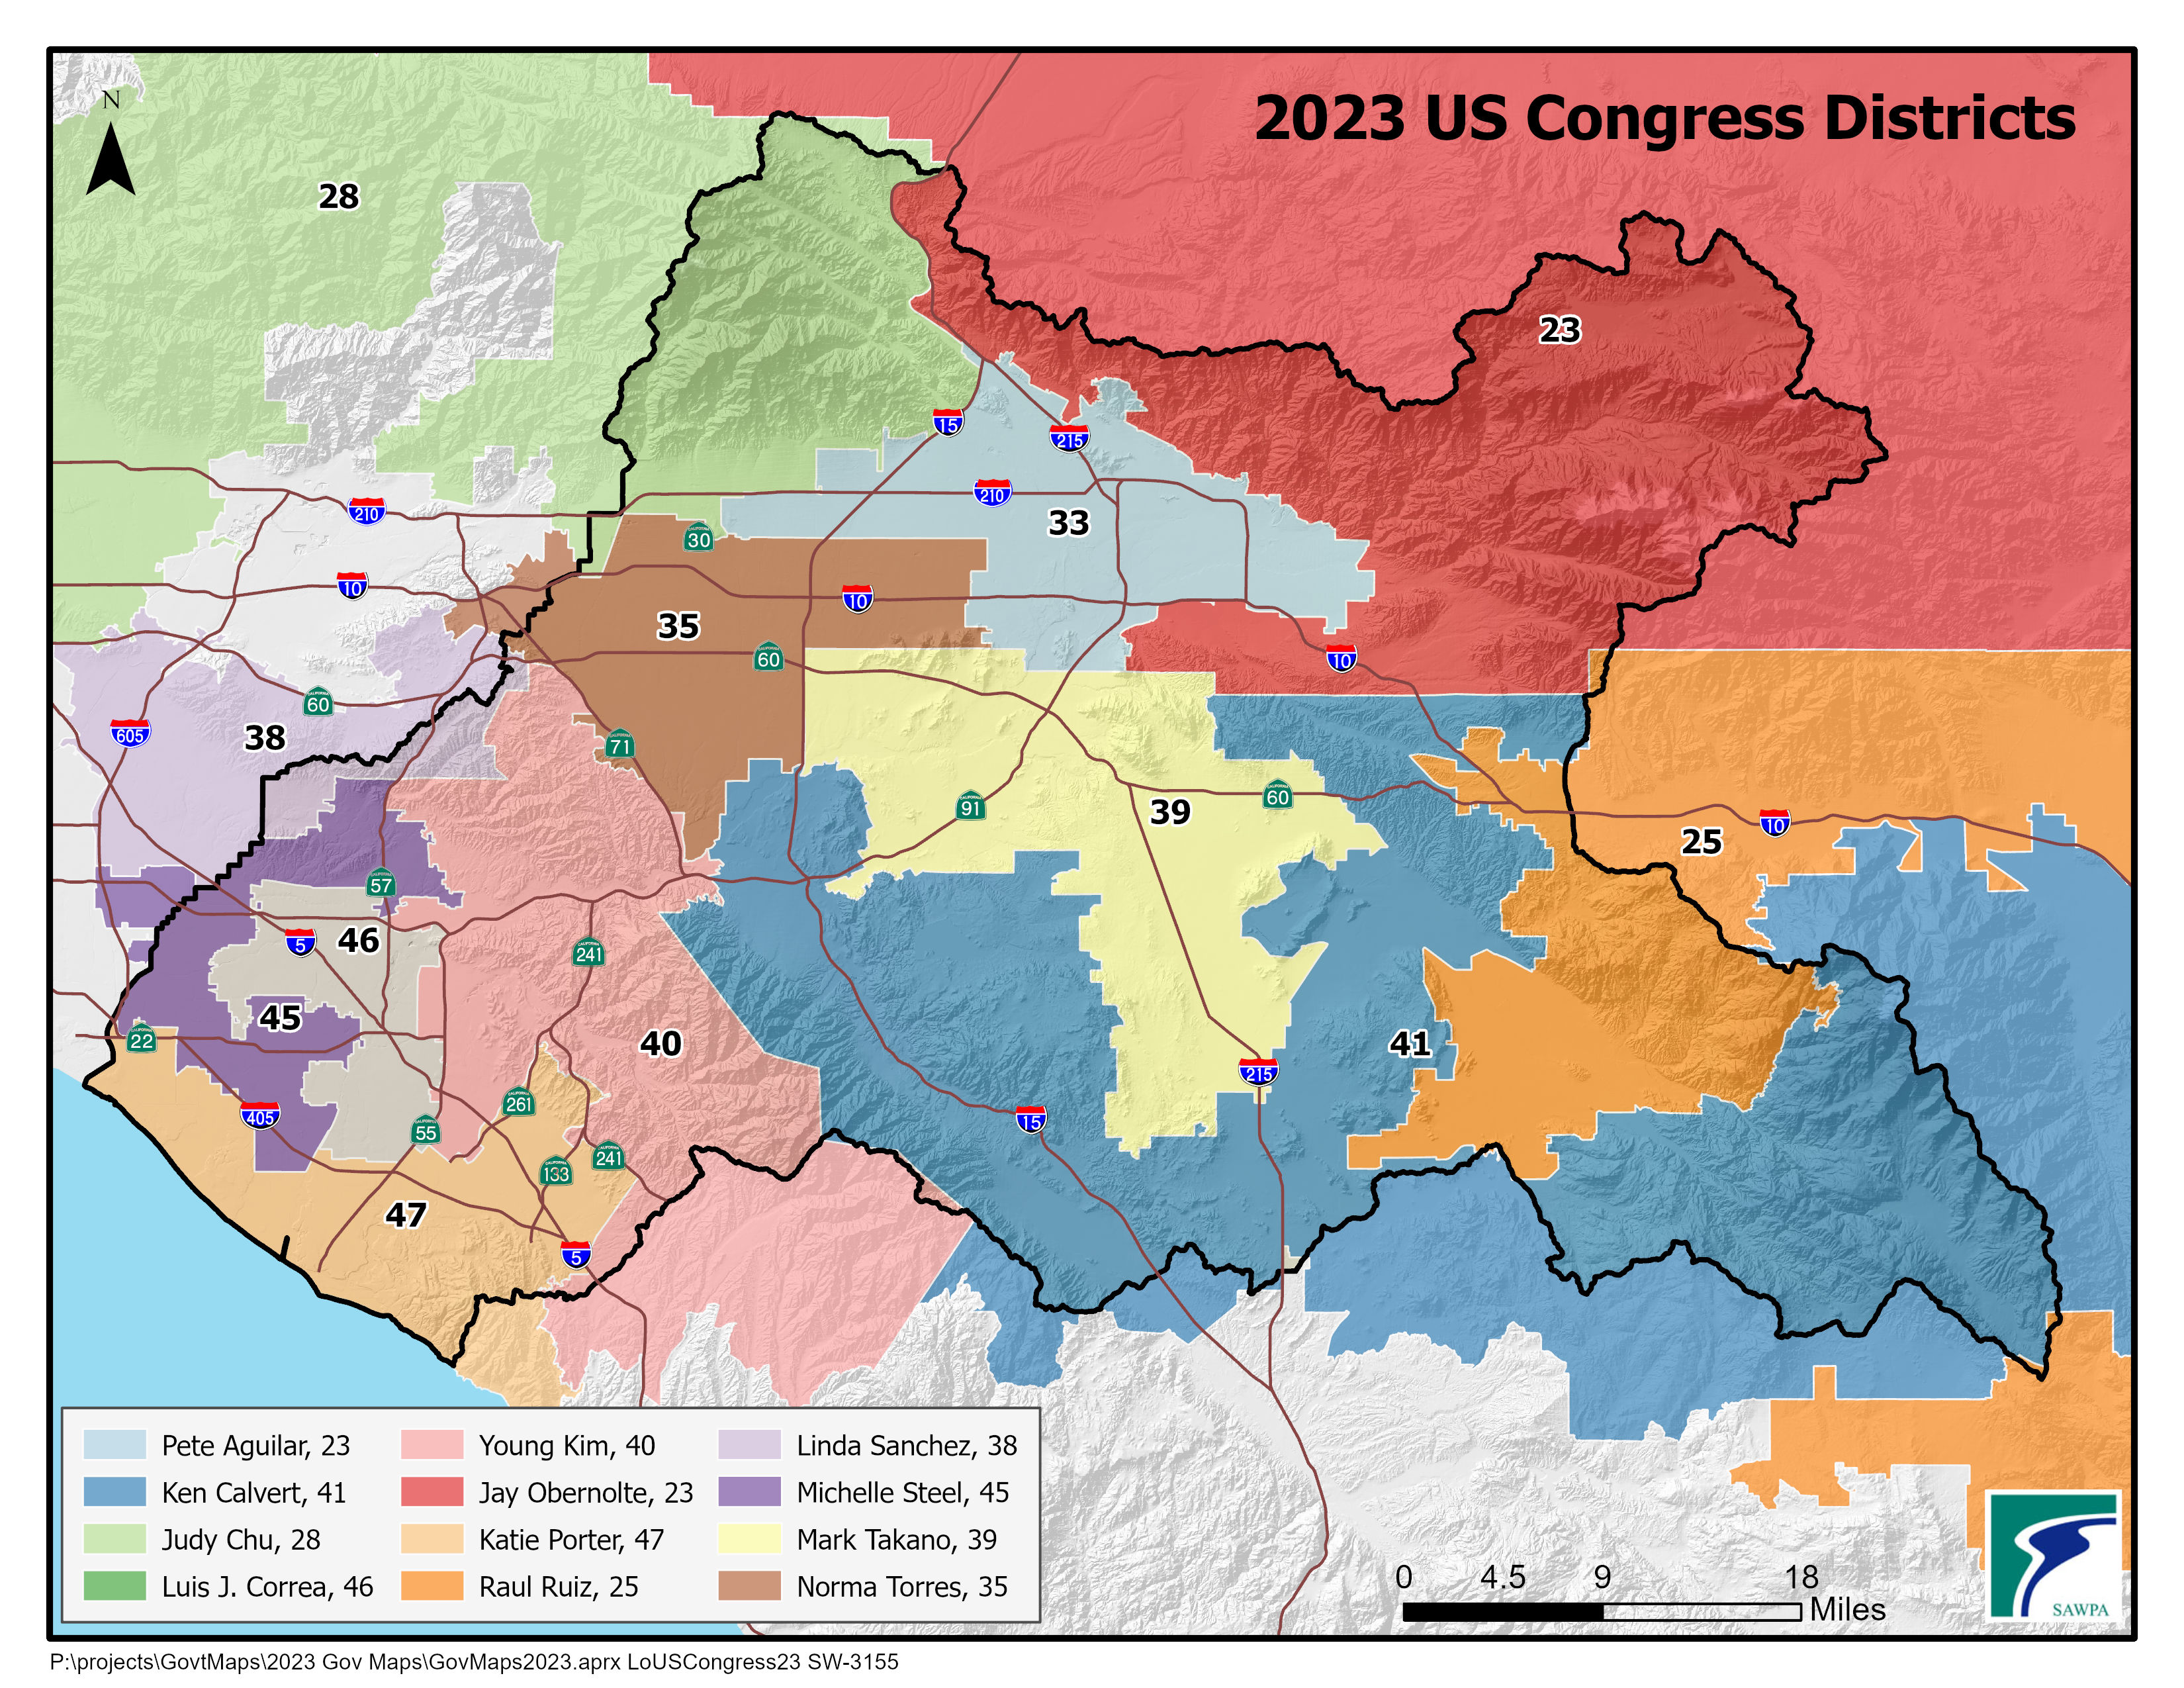 GIS map of US Congress